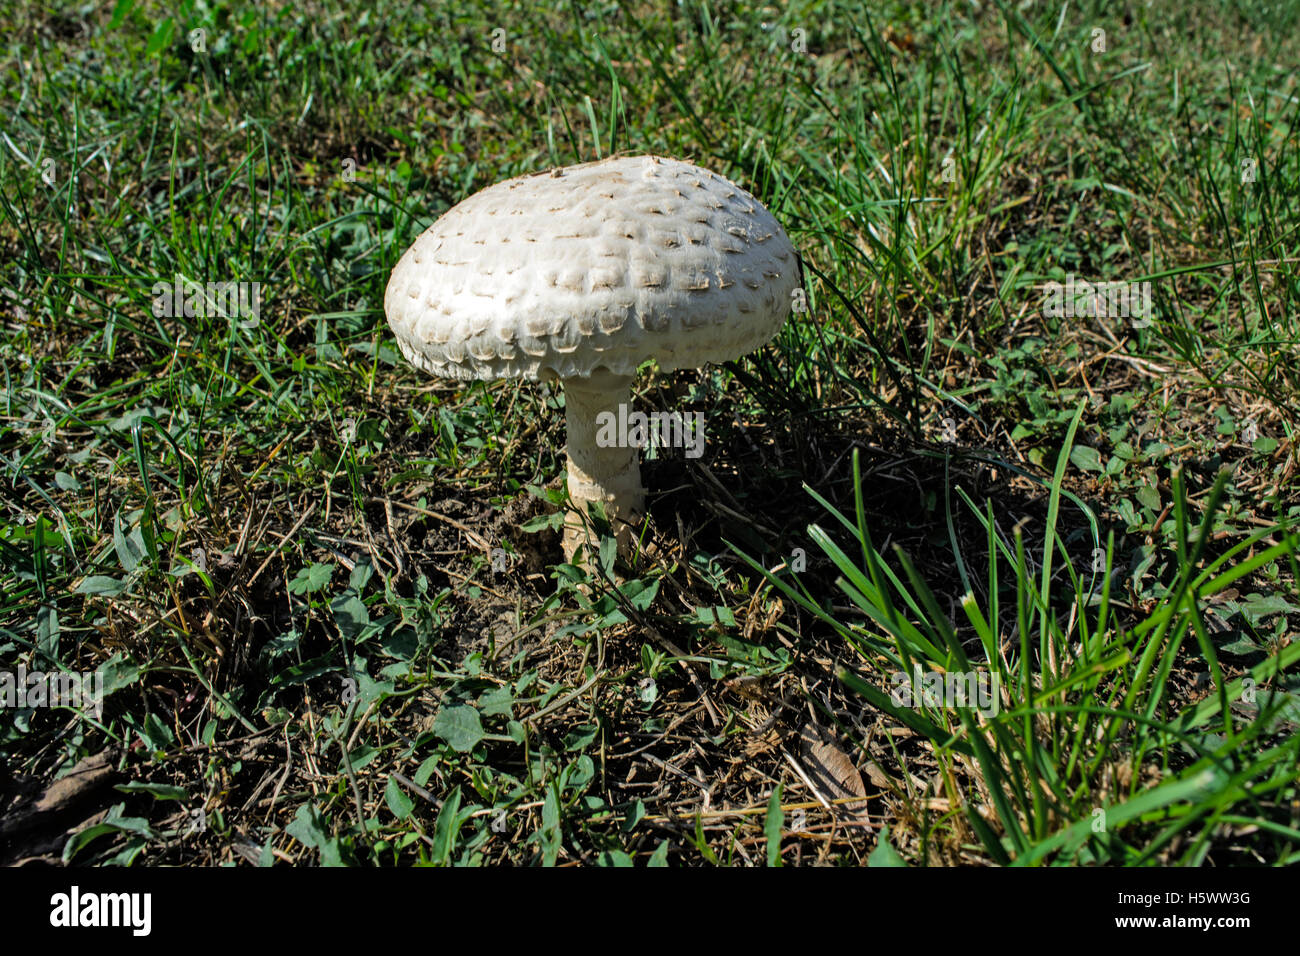 A beautiful white mushroom growing in the grass. Stock Photo